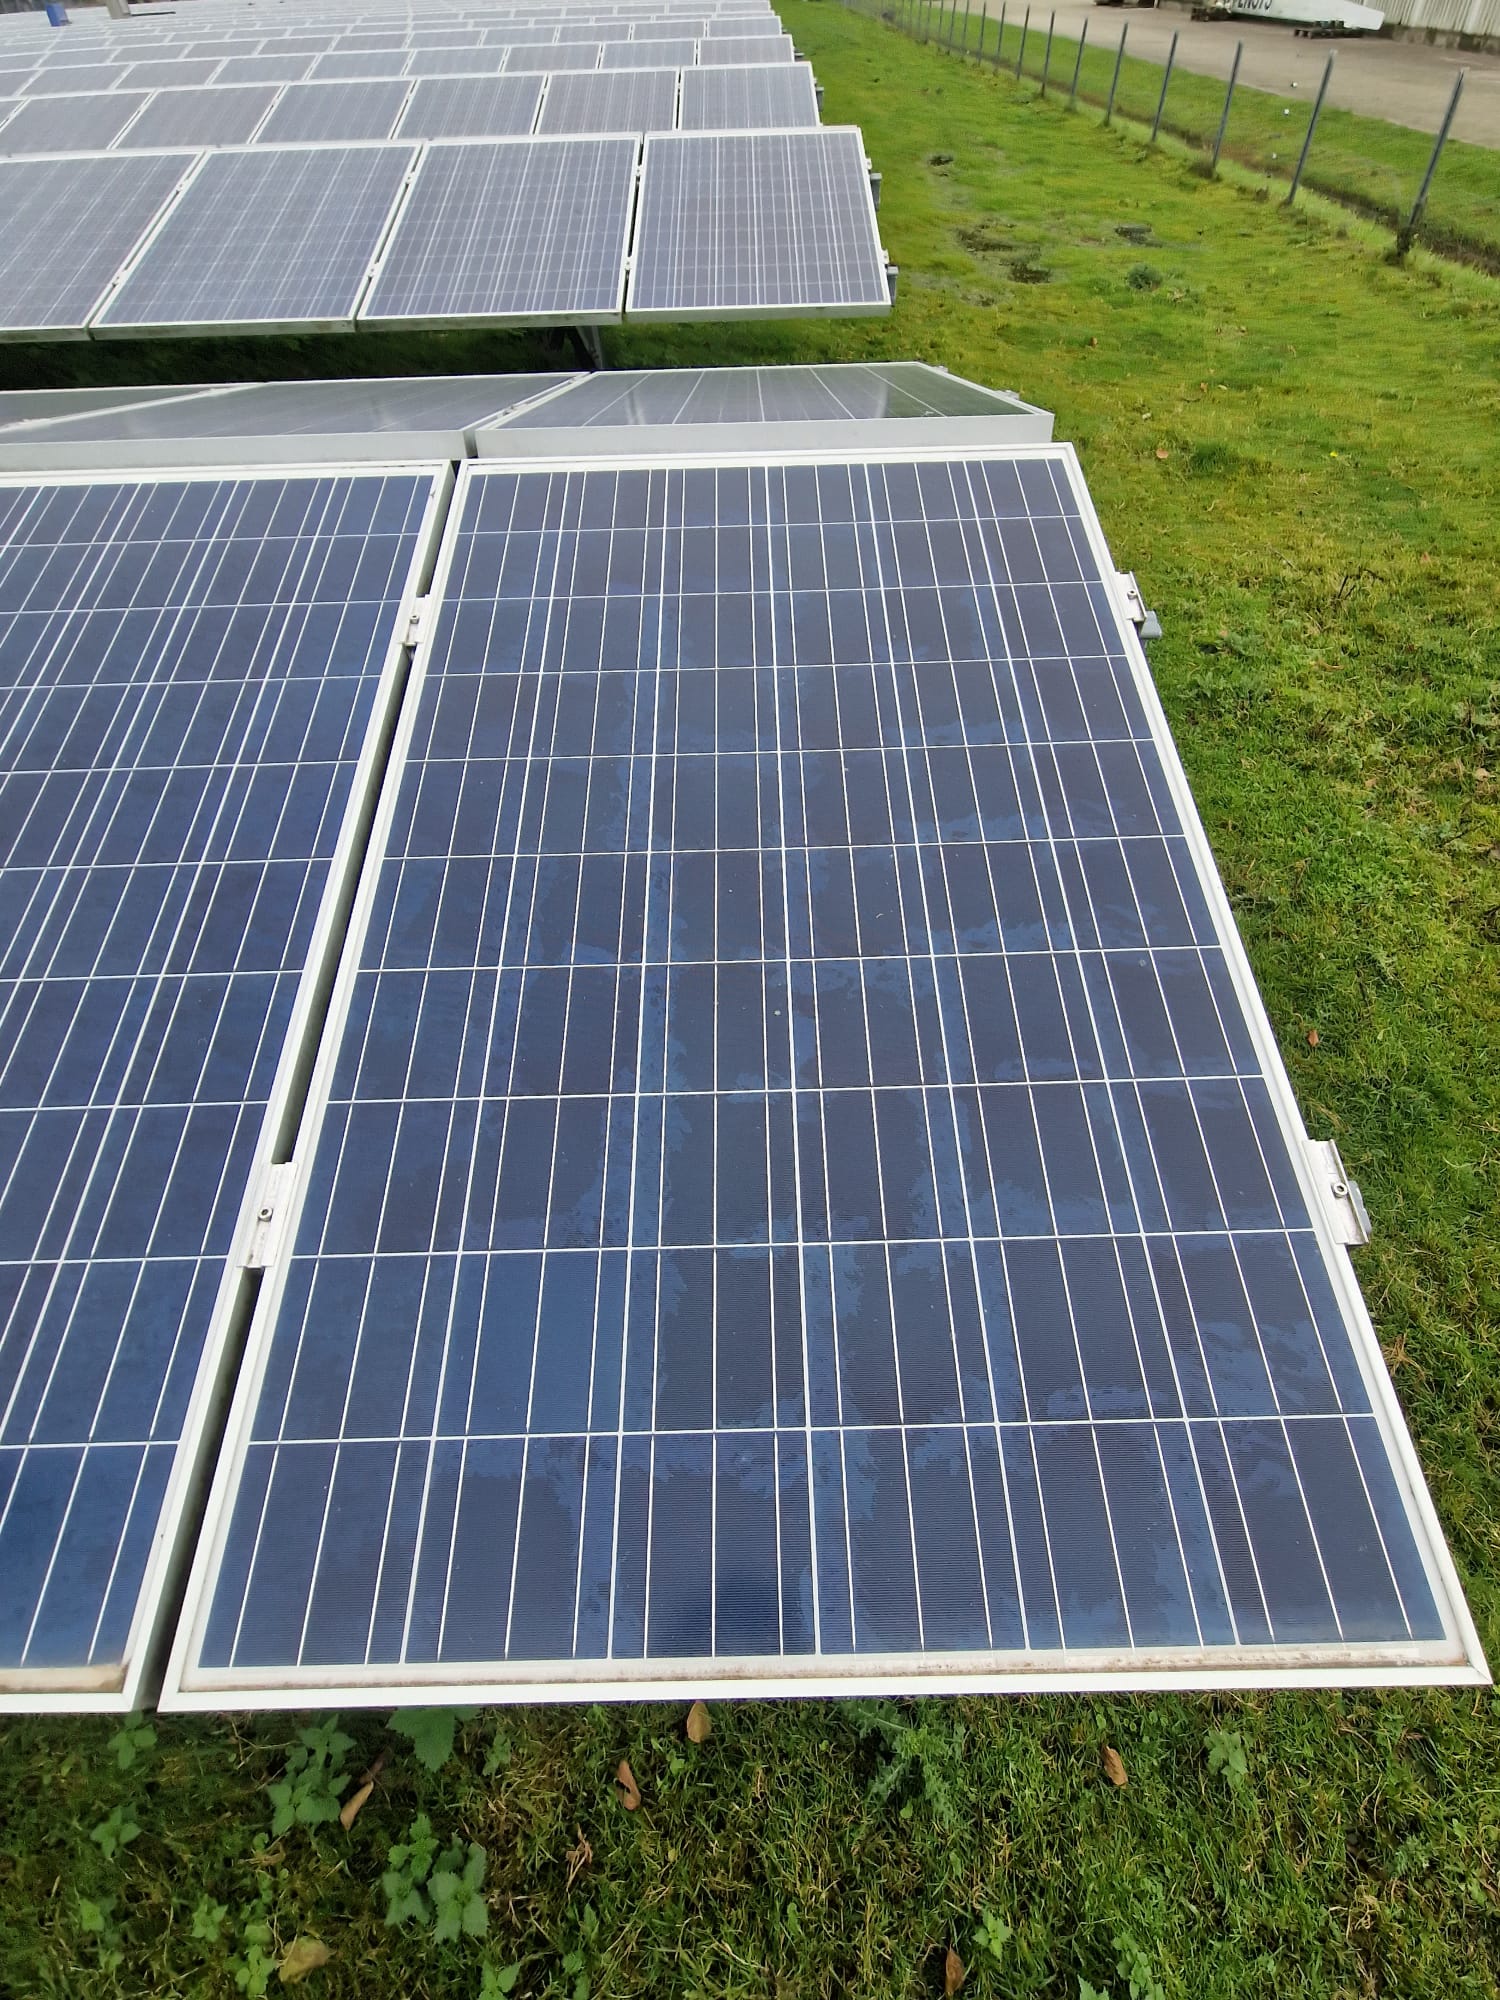 Second hand solar panels offer Europe